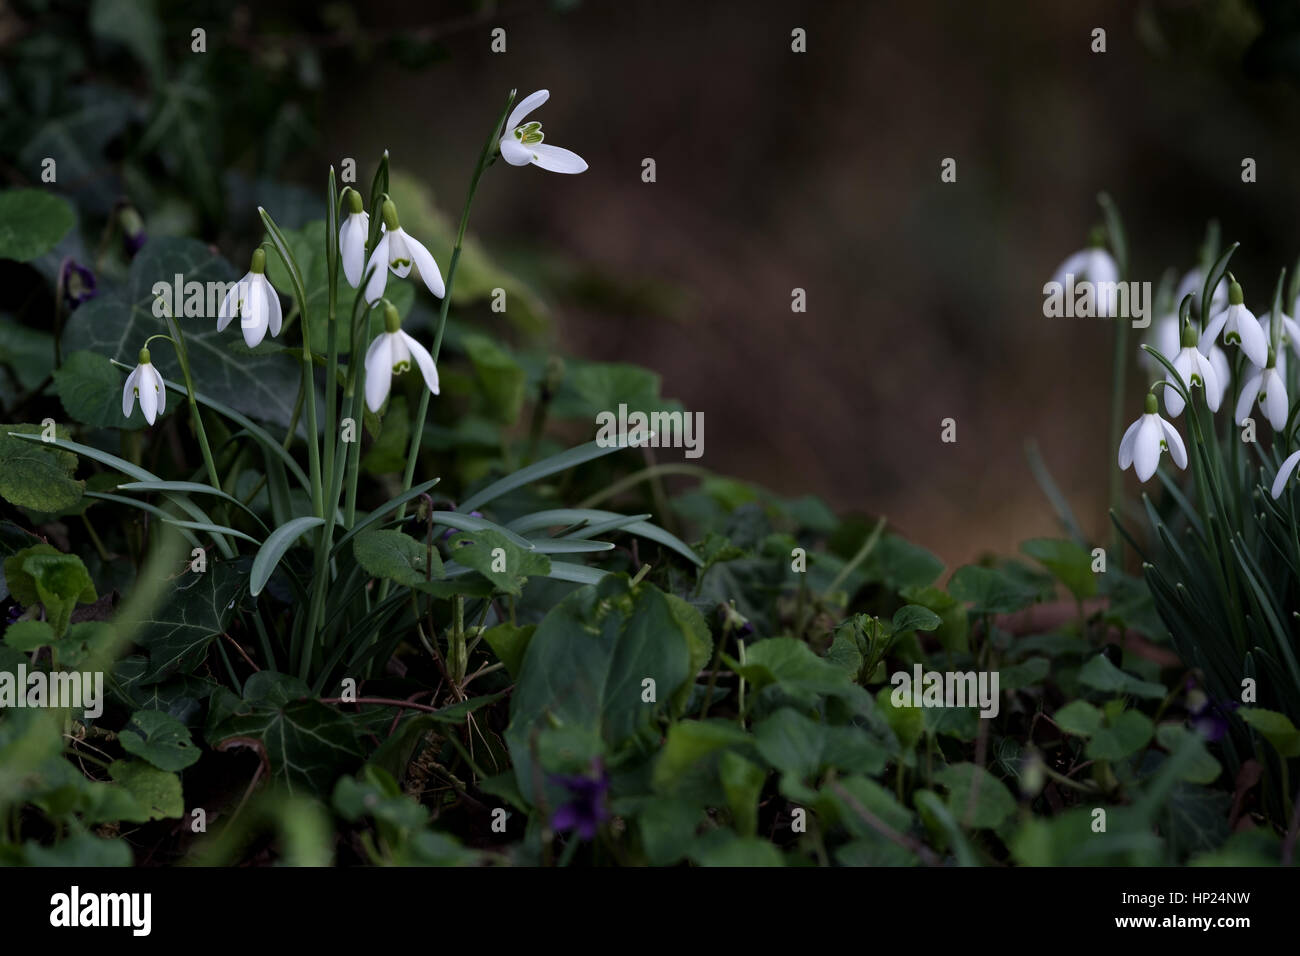 Snowdrops (Galanthus) in full bloom during late winter, early spring, growing in woodland. Stock Photo